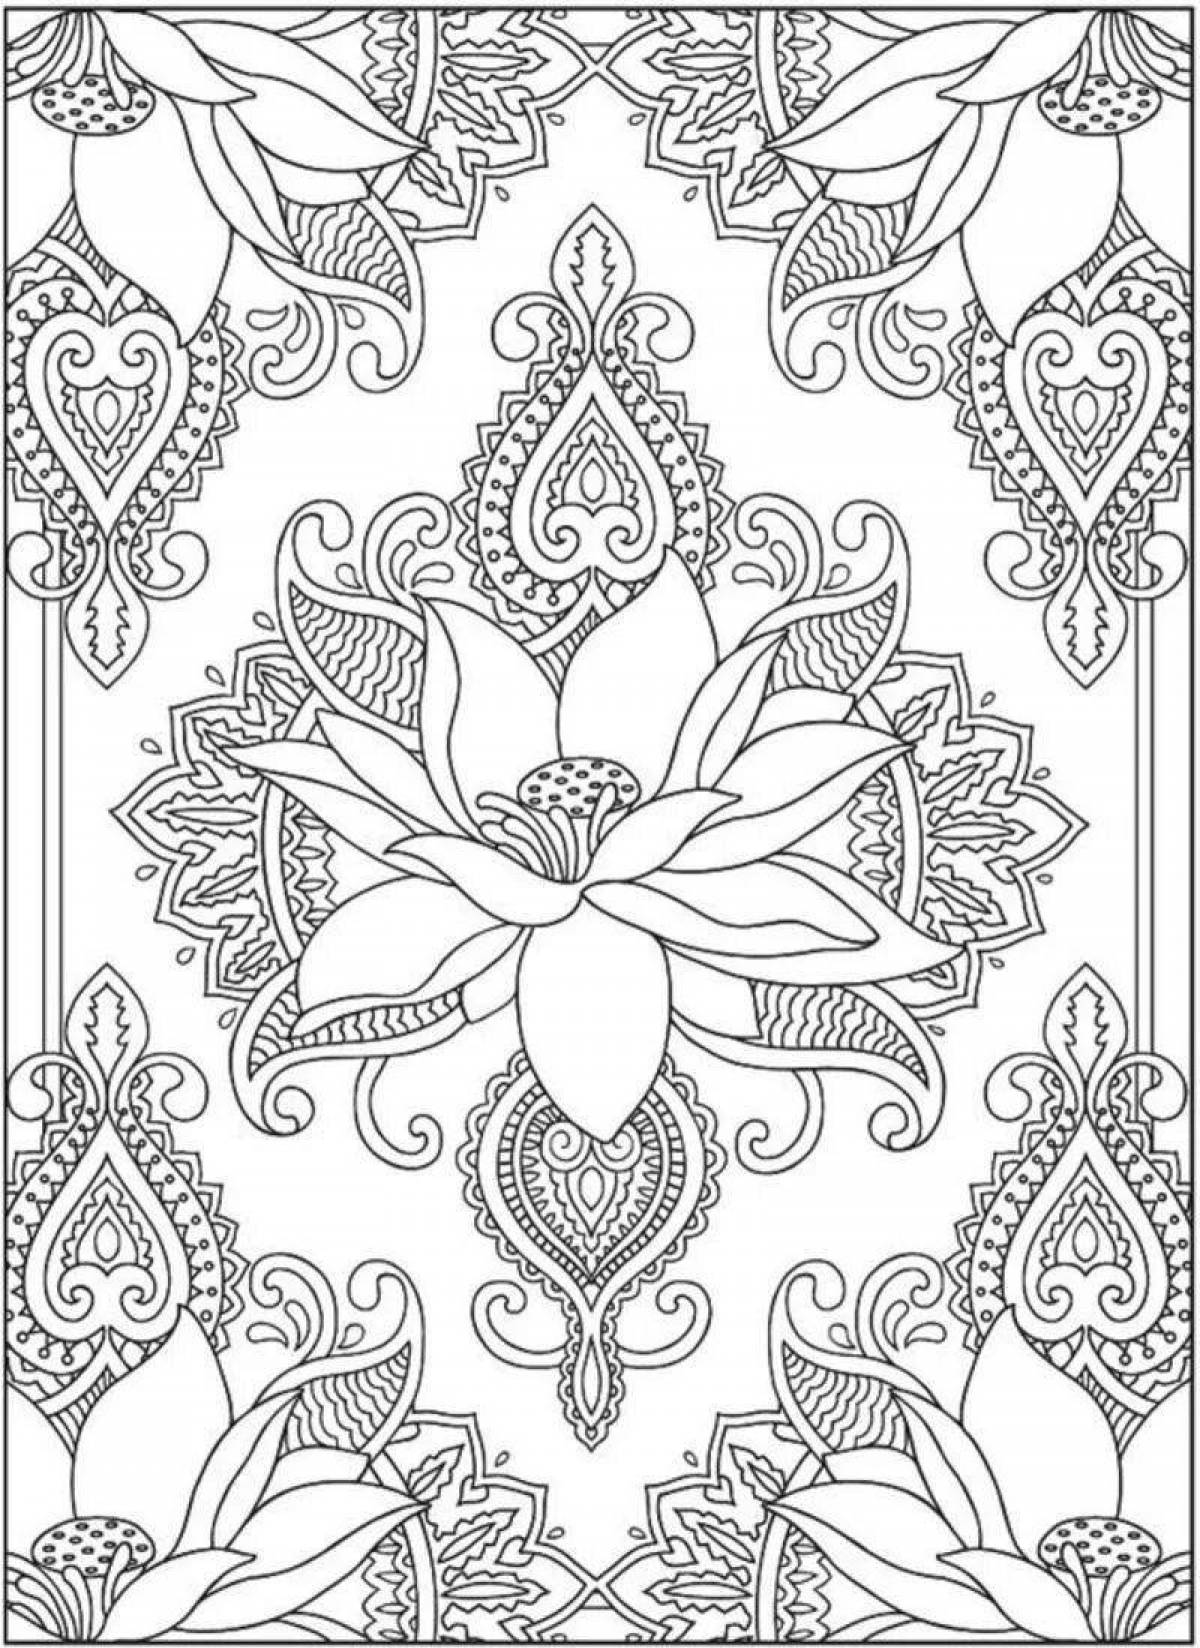 Harmonious anti-stress coloring book for adults 18